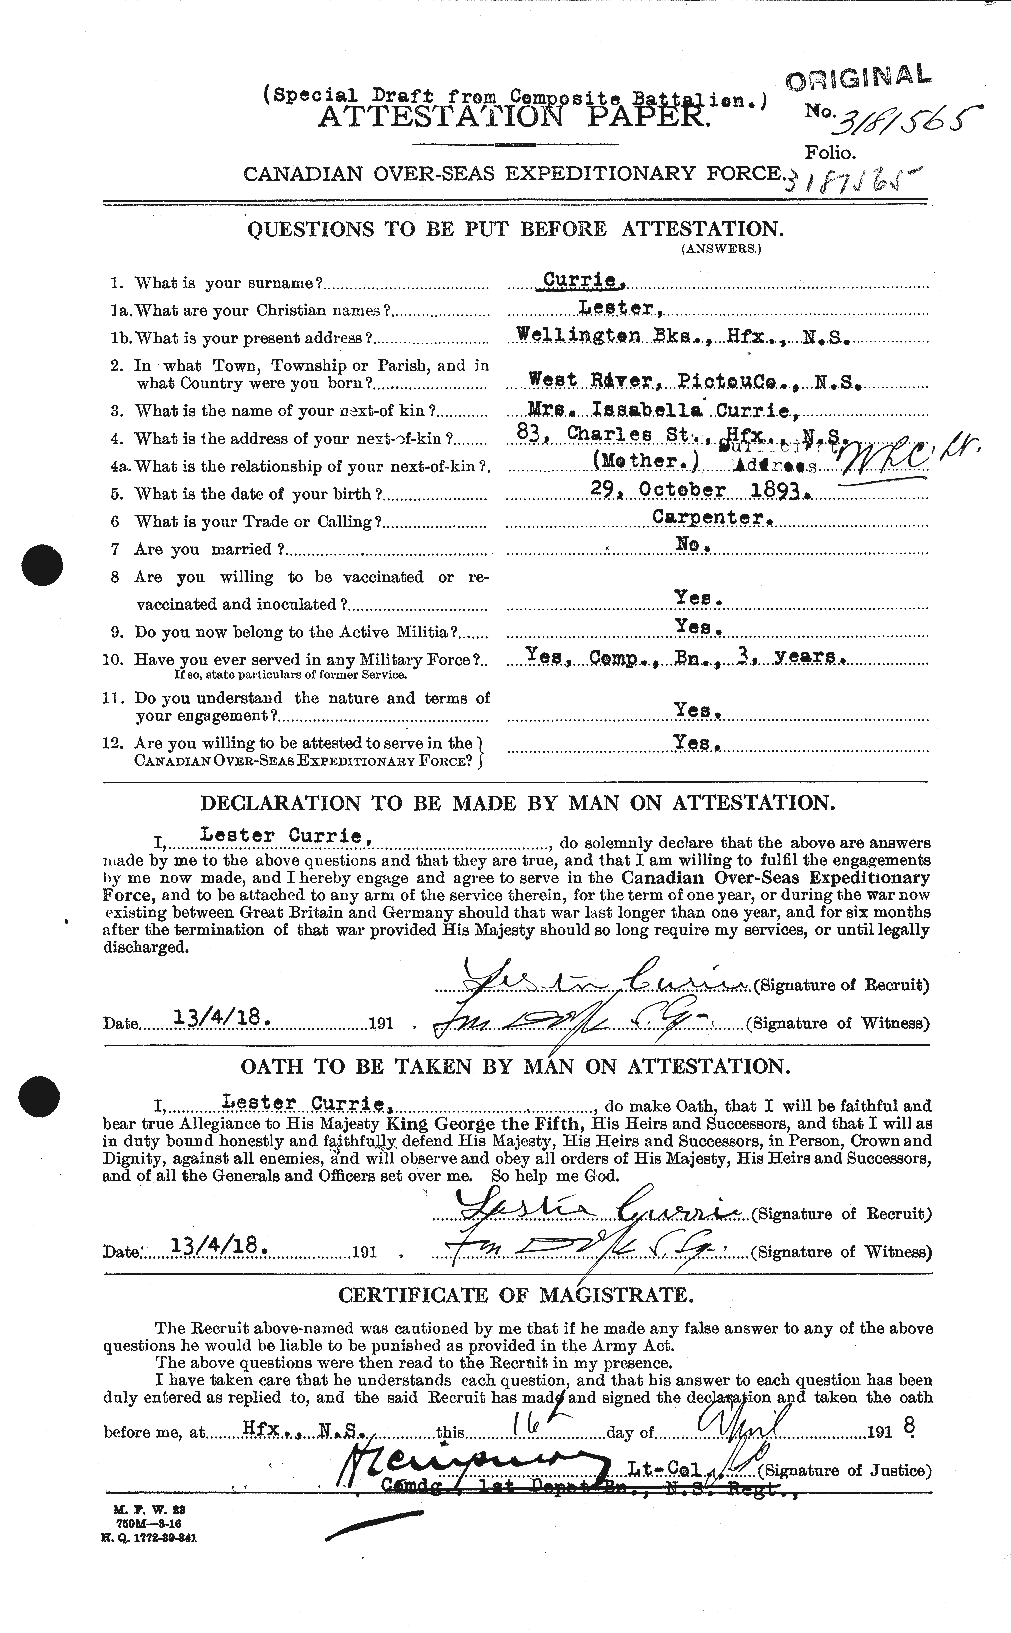 Personnel Records of the First World War - CEF 071668a